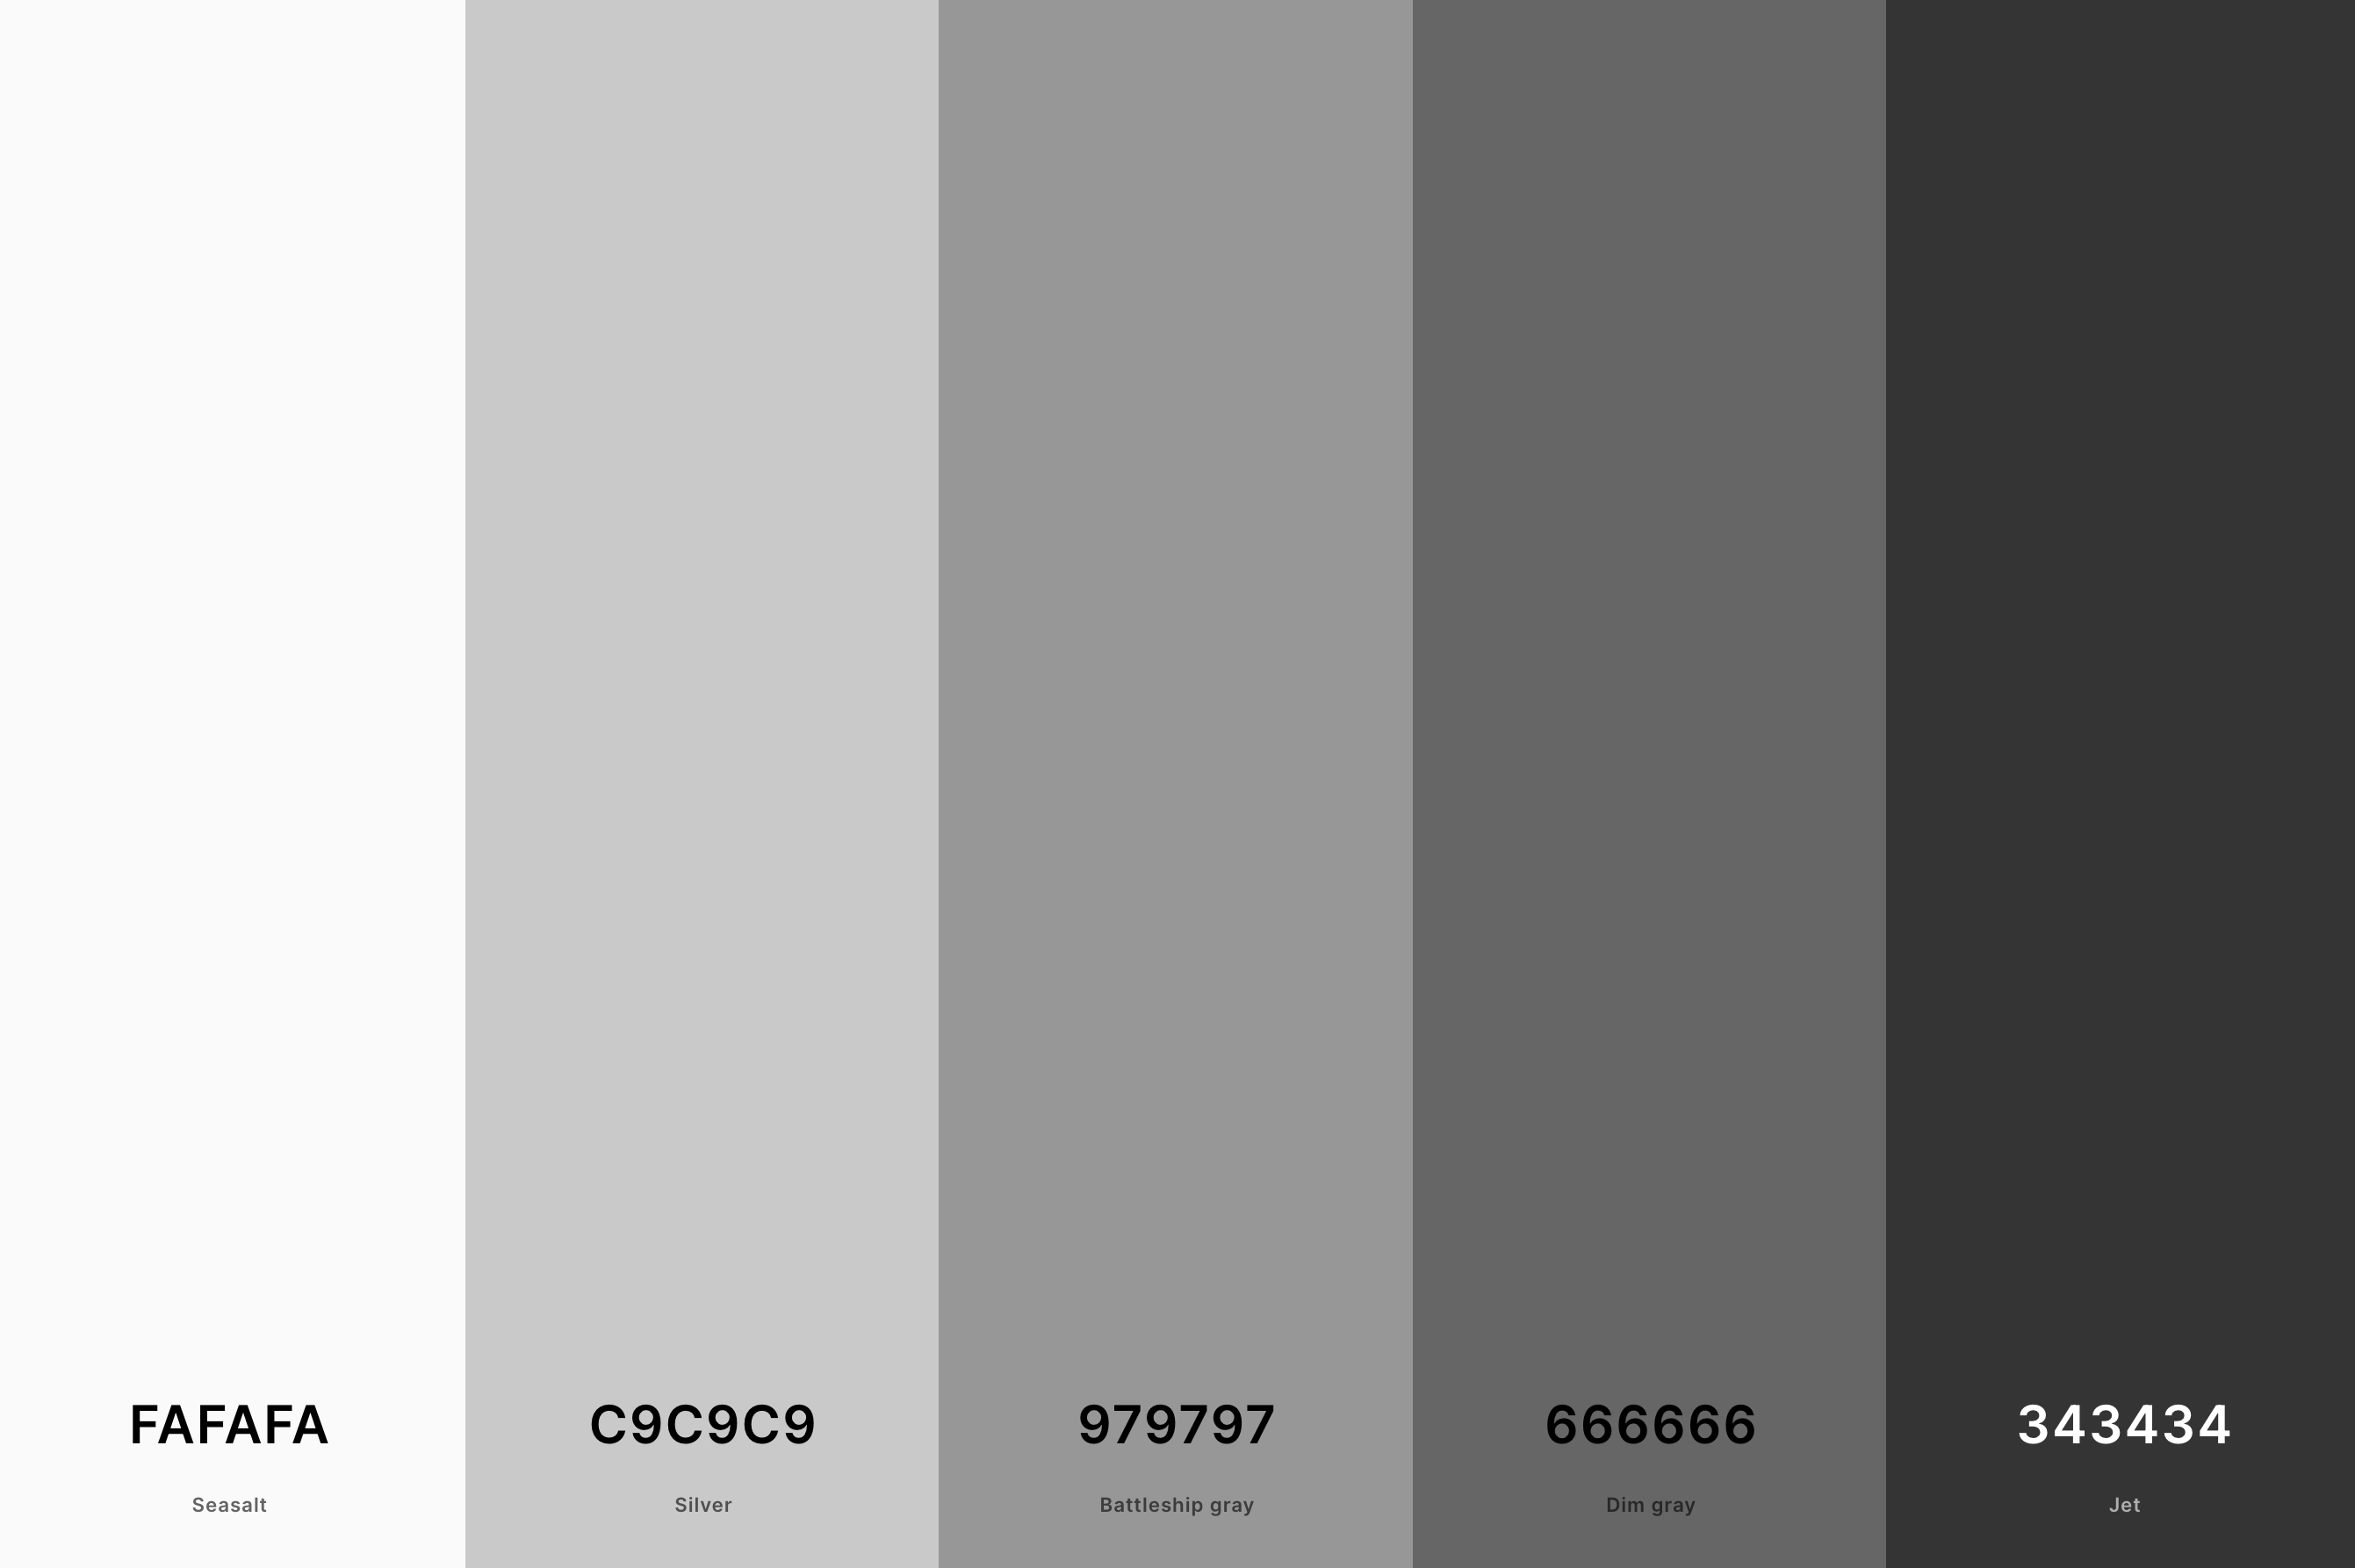 26. Gray And White Color Palette Color Palette with Naples Yellow (Hex #F3CF4B) + Old Gold (Hex #E1BF44) + Gold (Metallic) (Hex #CEA92F) + Satin Sheen Gold (Hex #BD9526) + Dark Goldenrod (Hex #A47E1B) Color Palette with Hex Codes